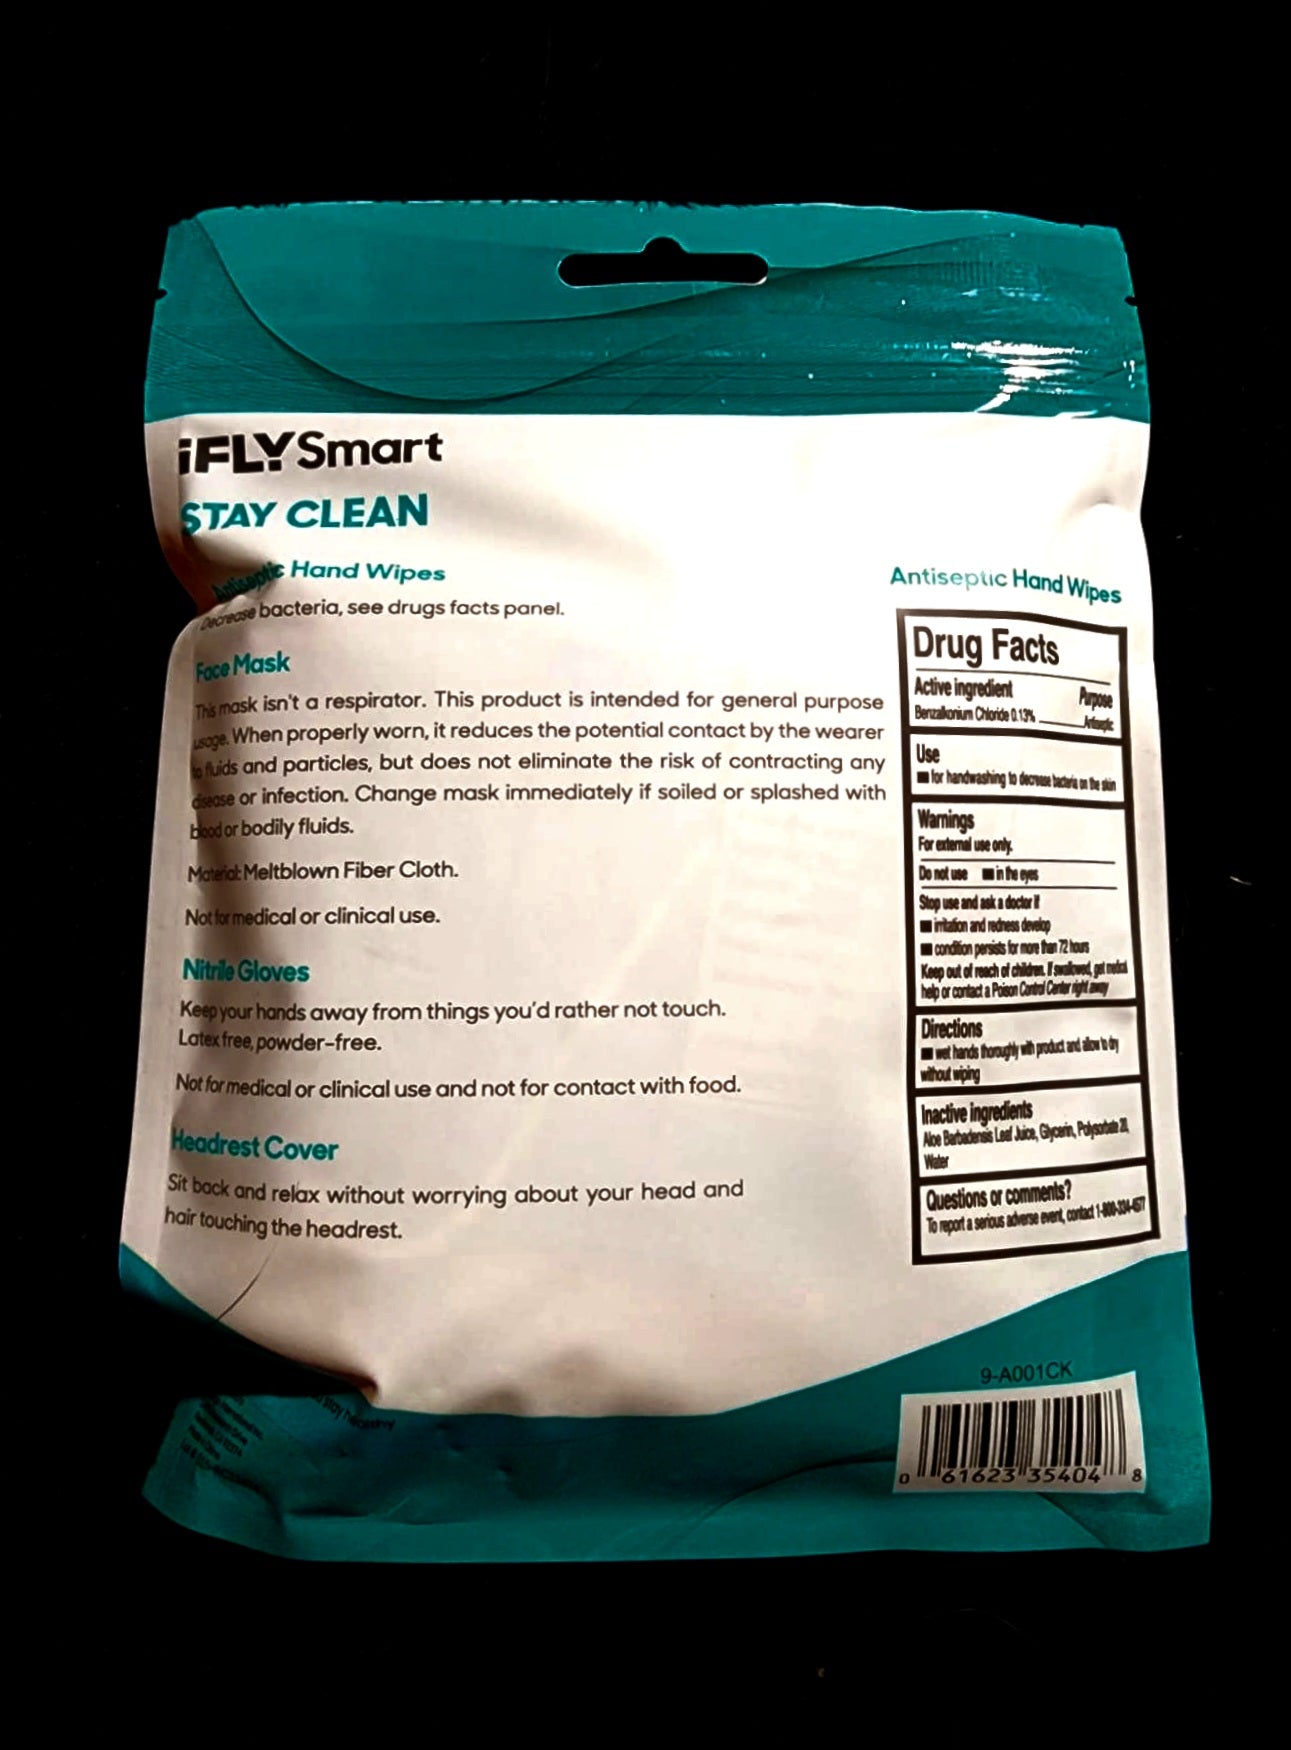 I Fly Smart Clean Kit